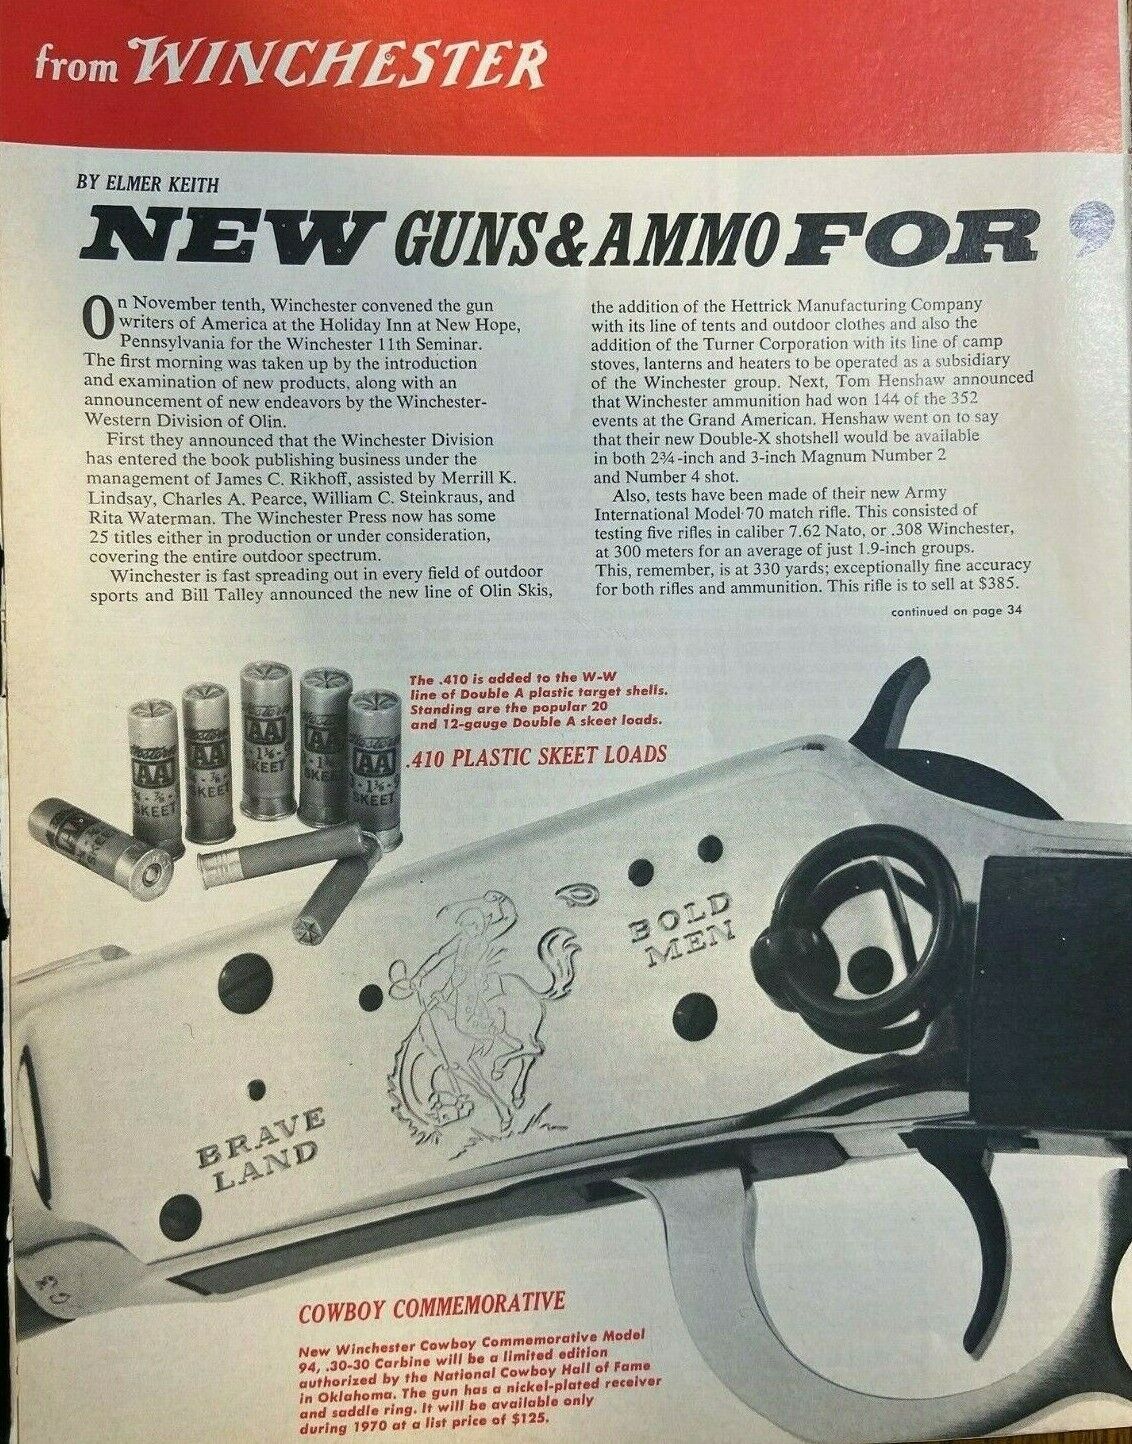 1970 New Winchester Guns and Remington Ammunition illustrated